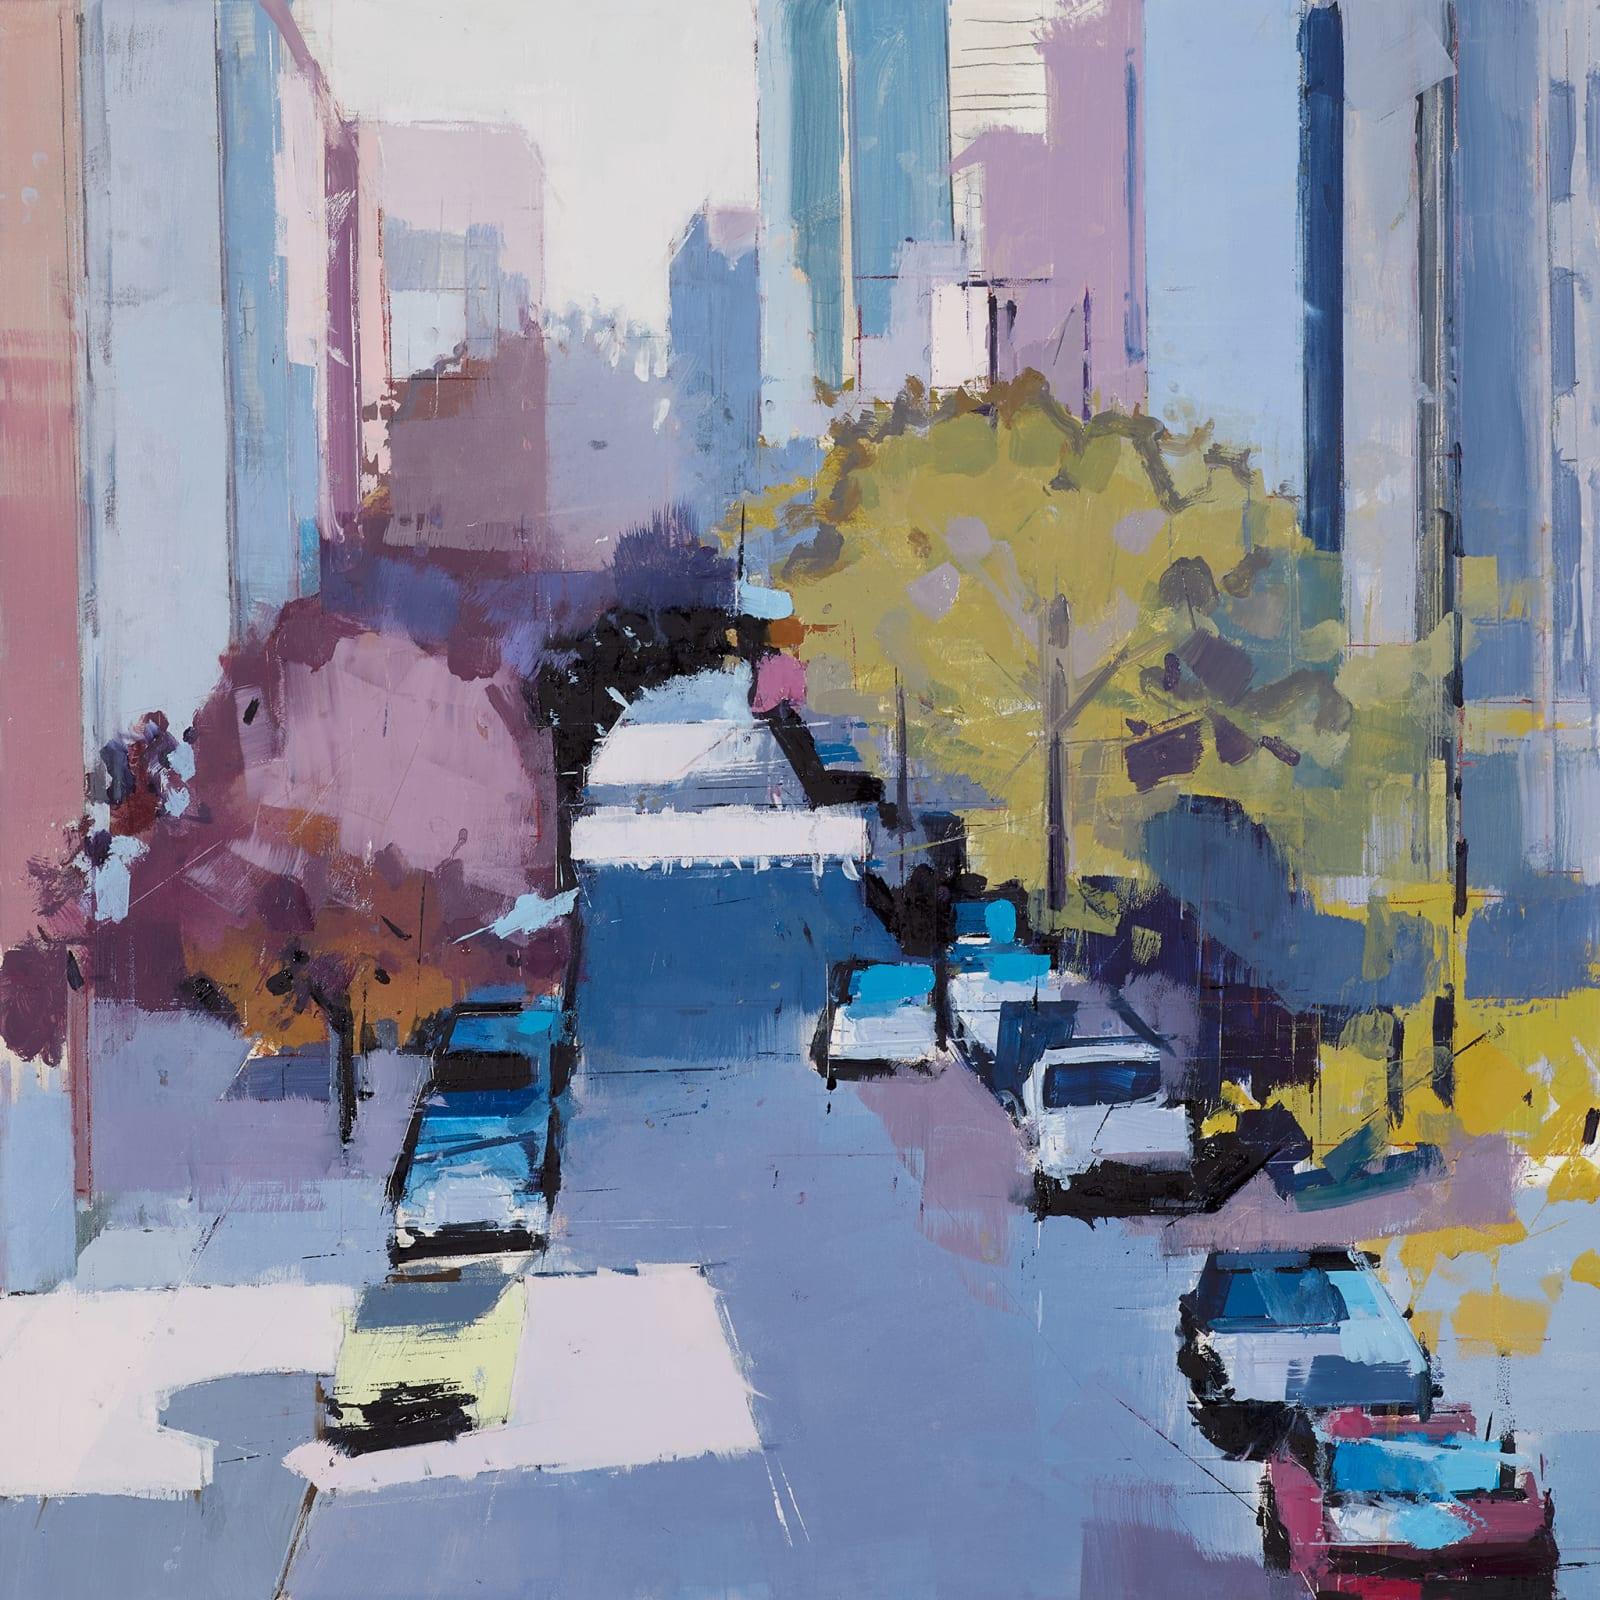 Lisa Breslow "Greens and Purples" - Contemporary Cityscape Painting on Panel